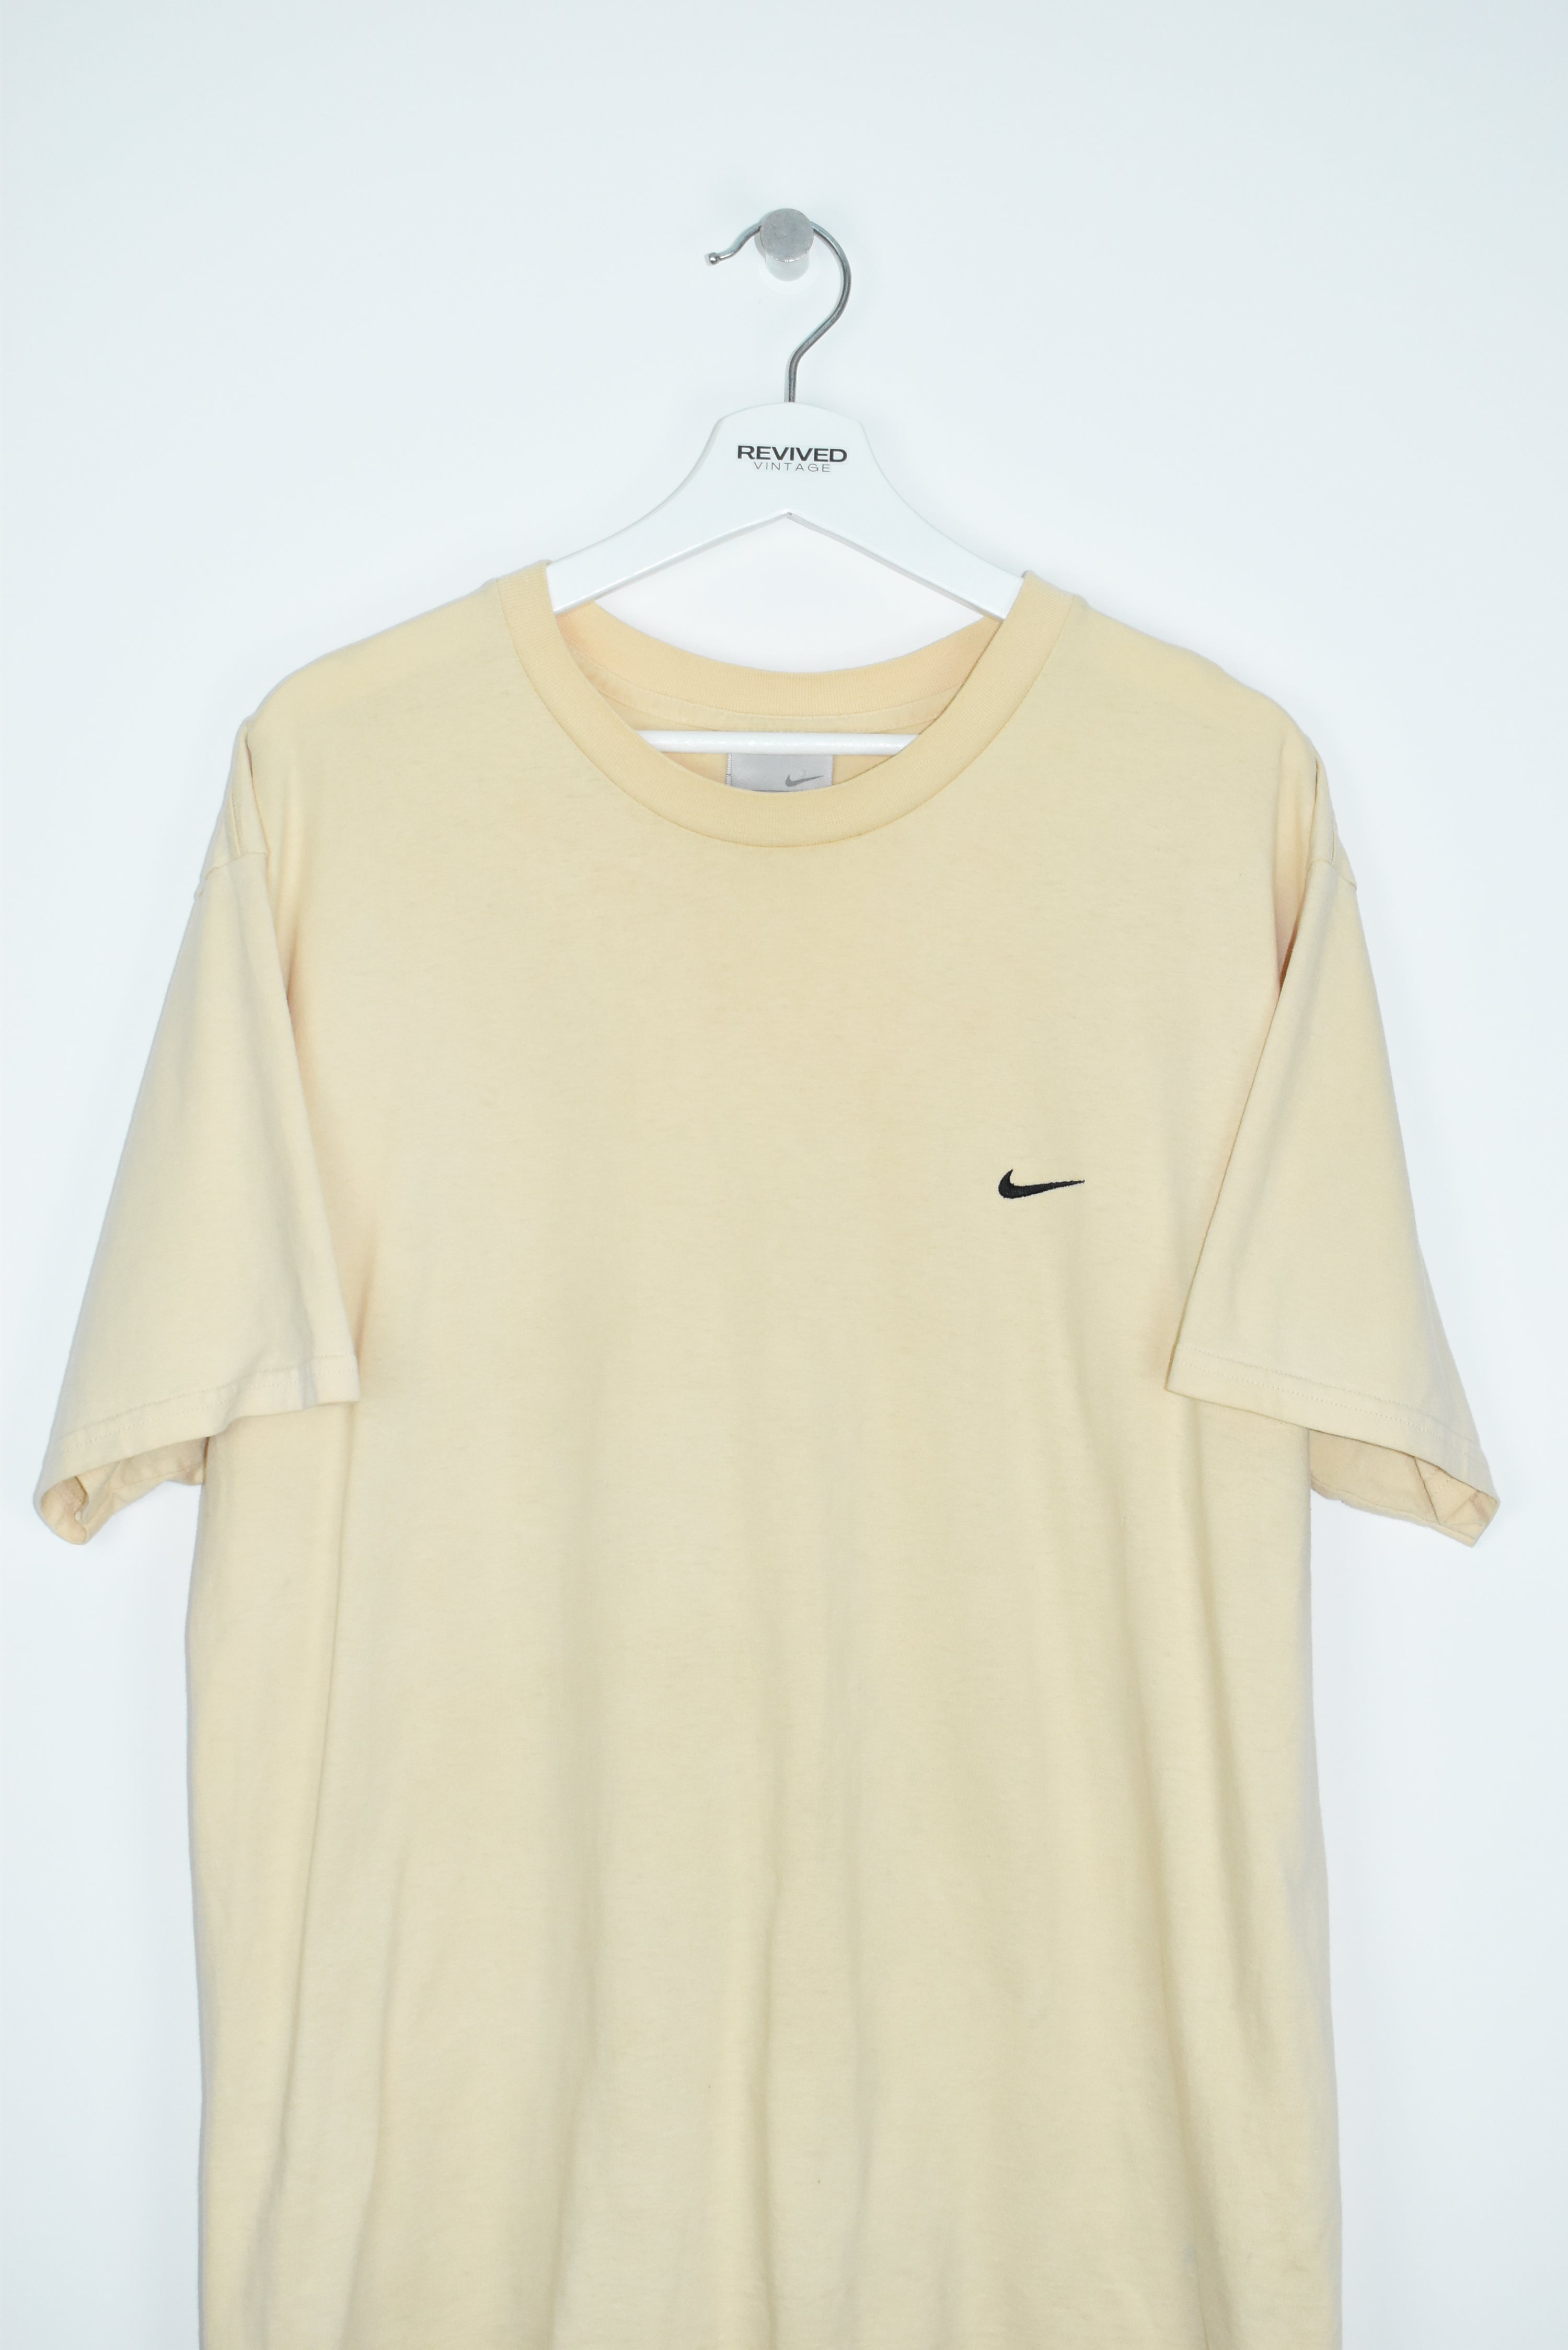 VINTAGE NIKE SMALL SWOOSH EMBROIDERY T SHIRT TAN LARGE